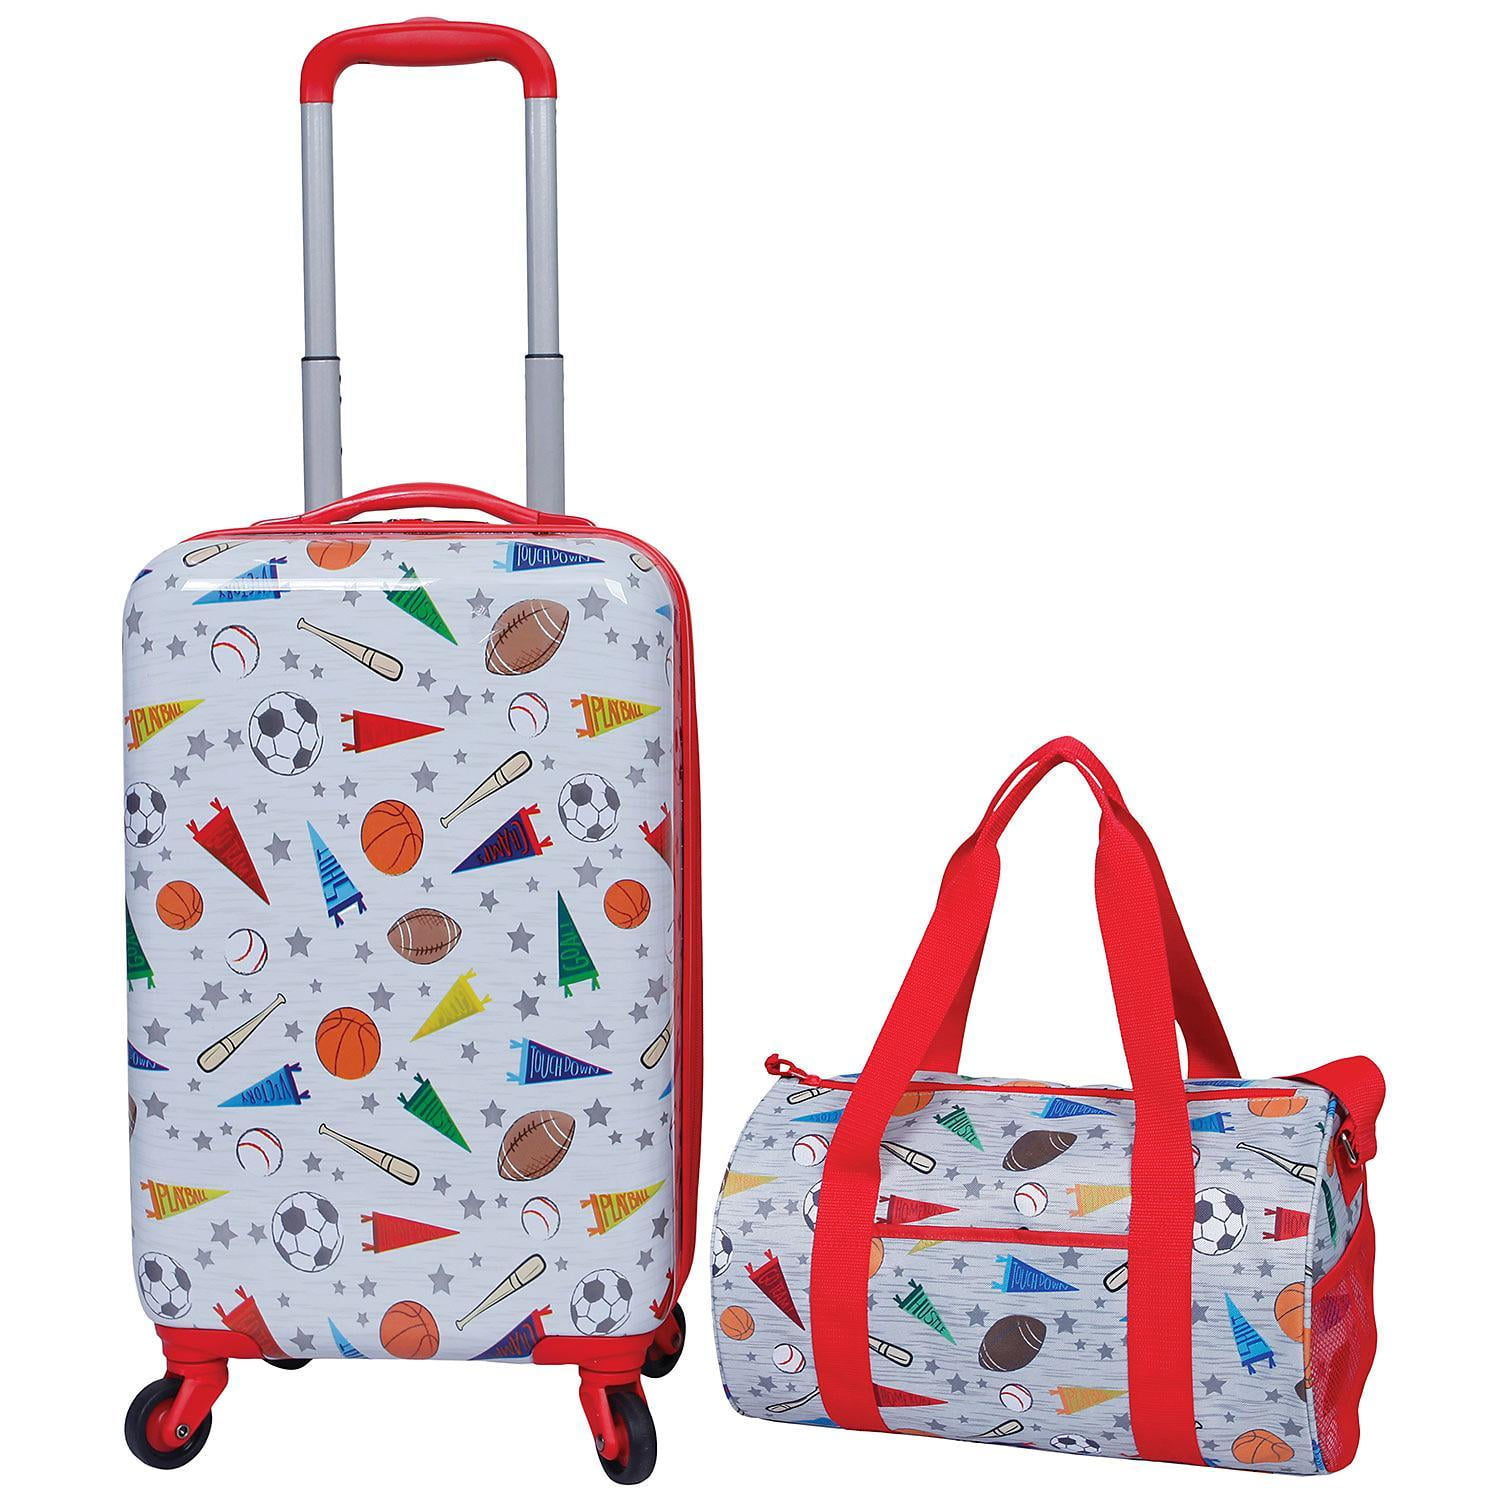 luggage for children